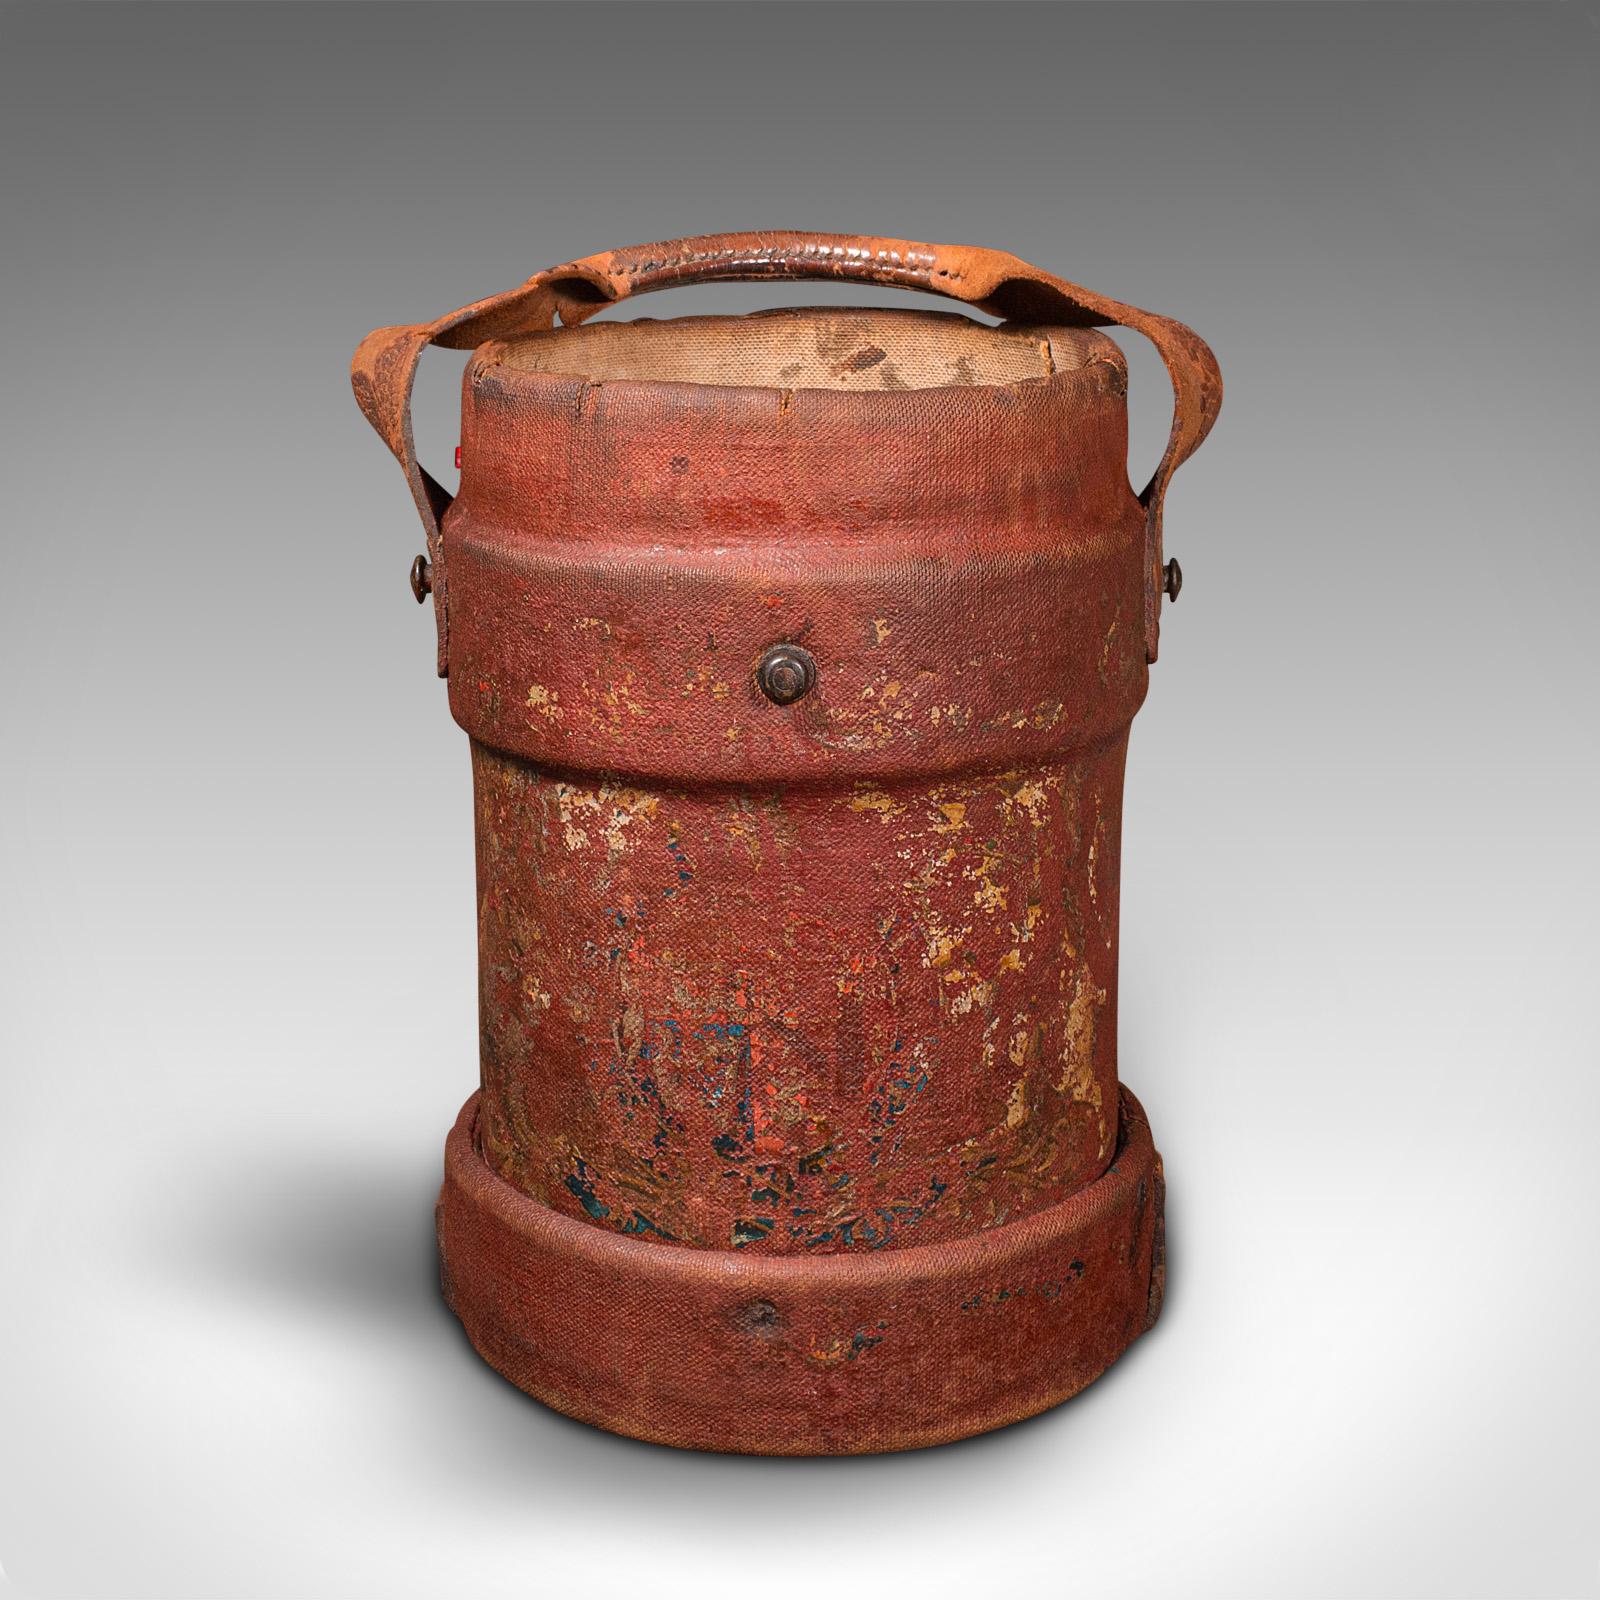 This is an antique decorative bucket. An English, waxed canvas and leather log or storage bin, dating to the Edwardian period, circa 1910.

Presents a fascinating, pleasingly weathered appeal
Displays a desirable aged patina throughout
Canvas